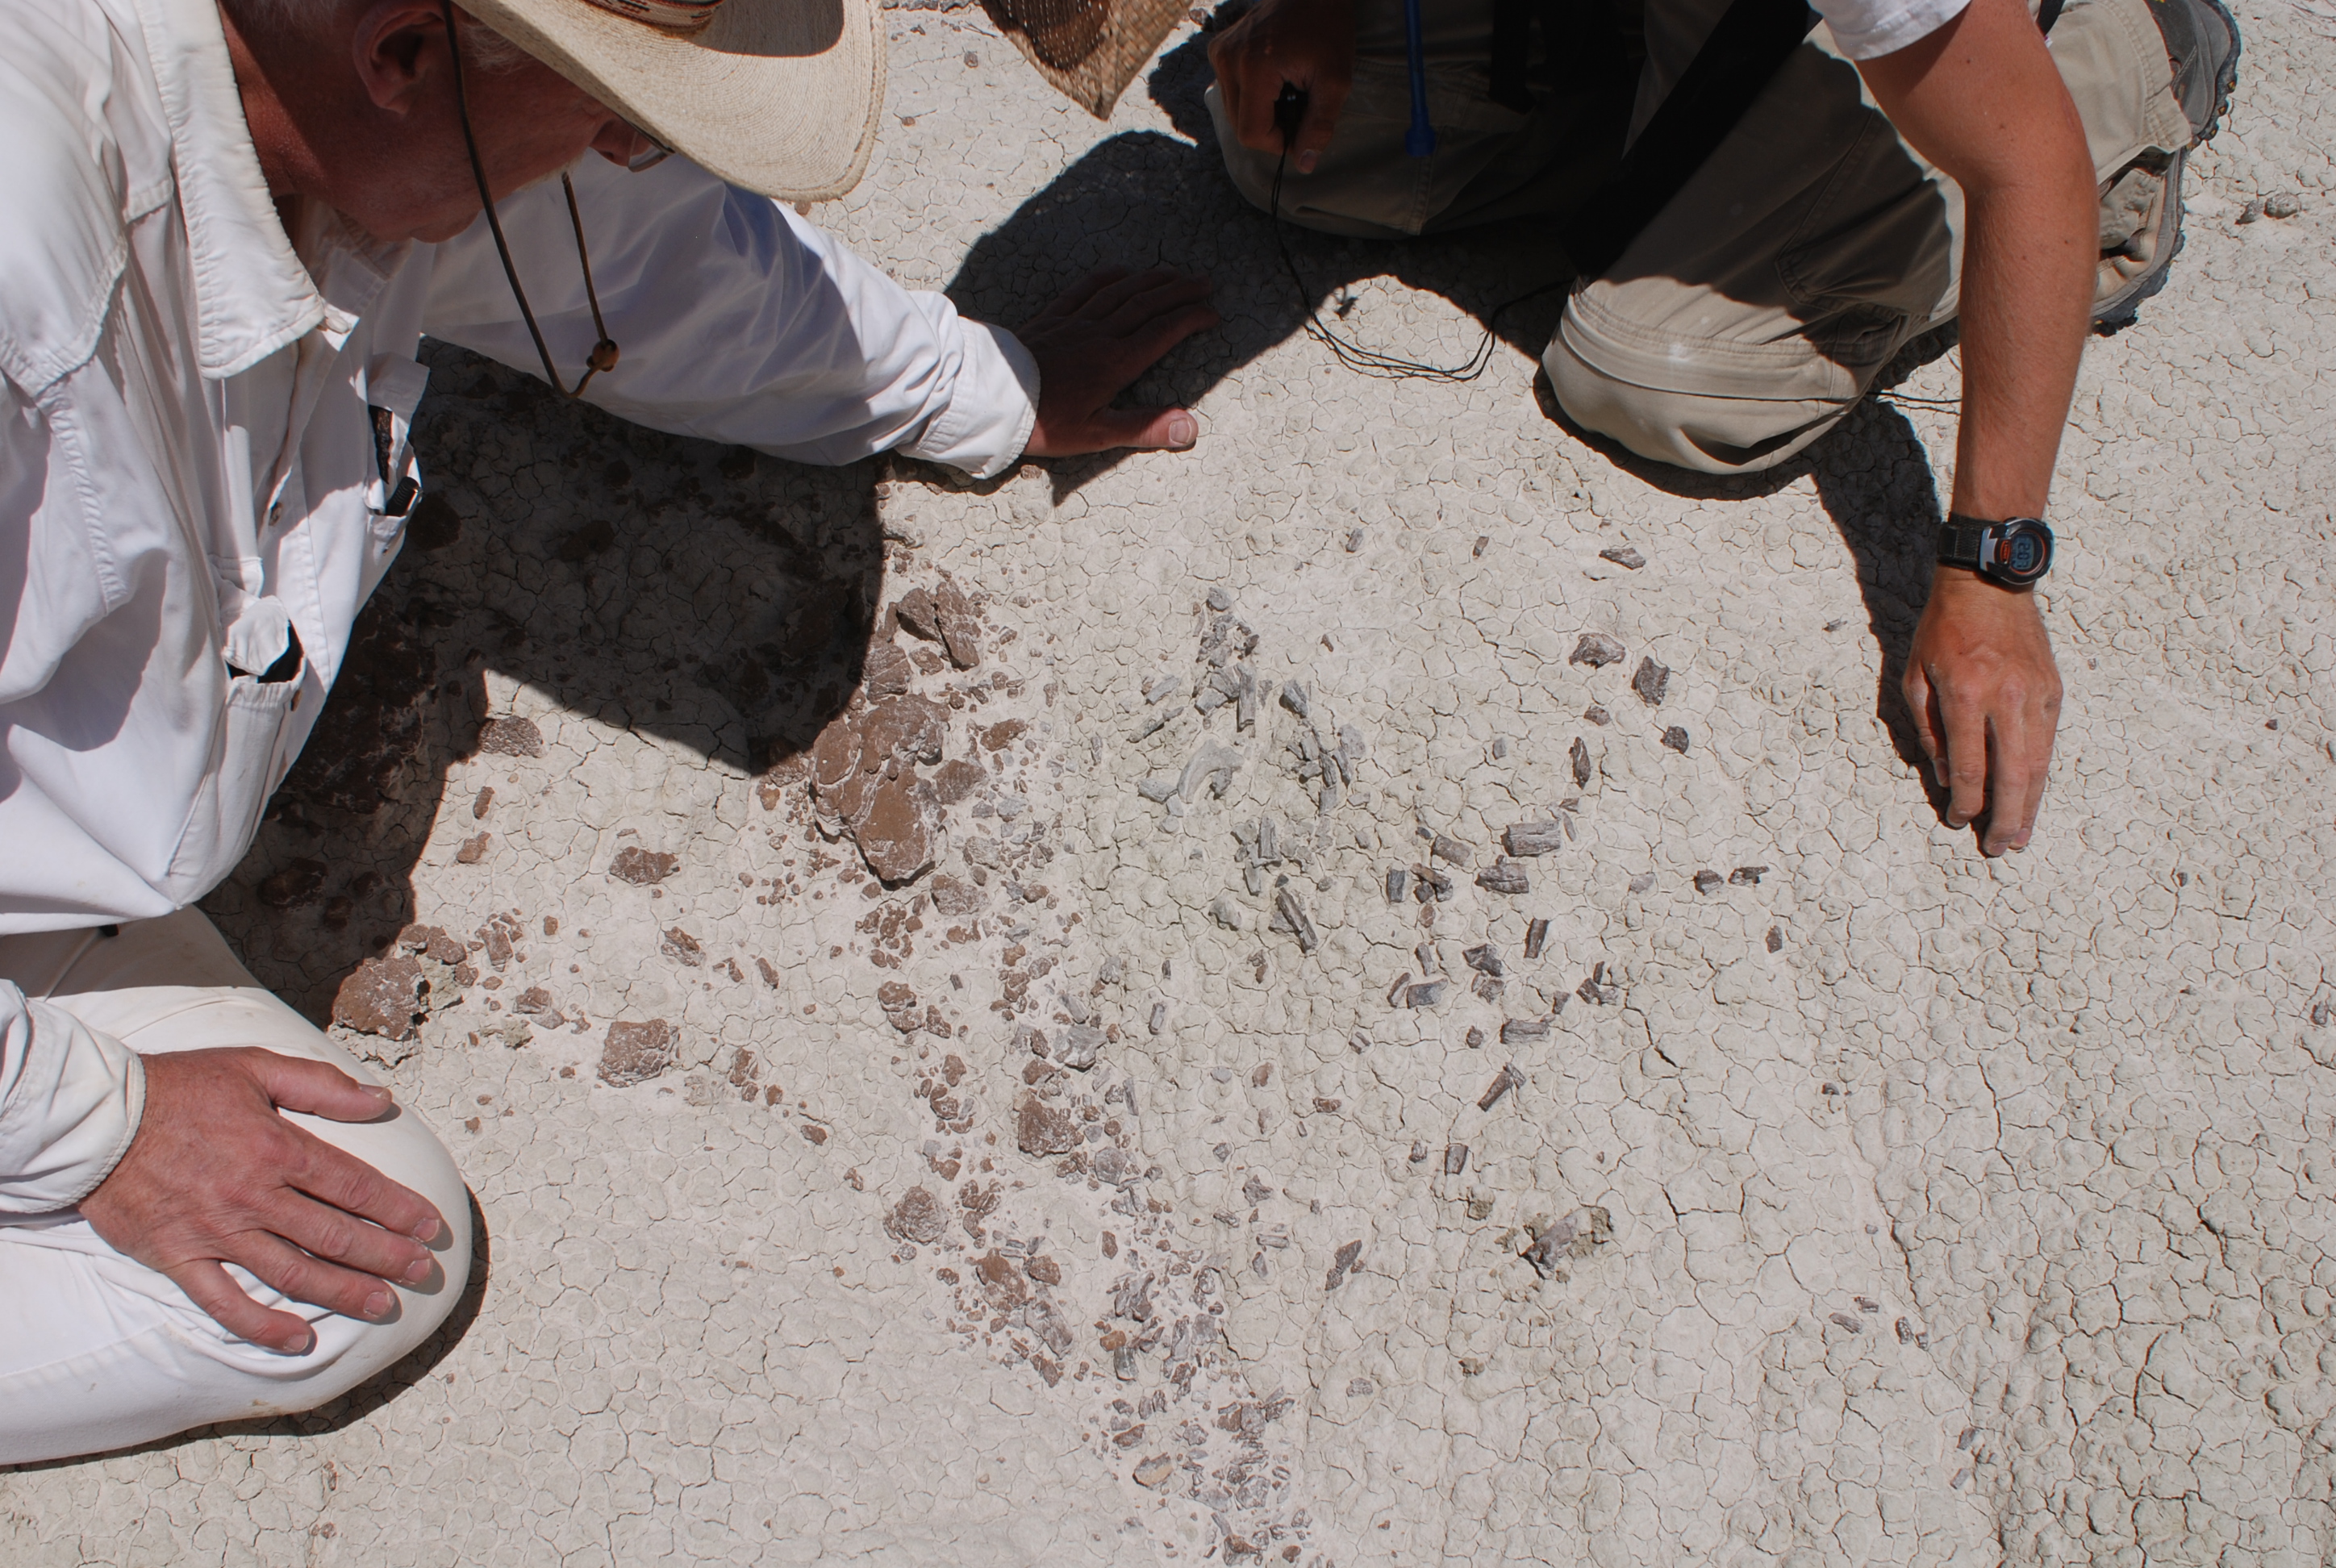 Two scientists observe portions of a fossil embedded in dirt and rock